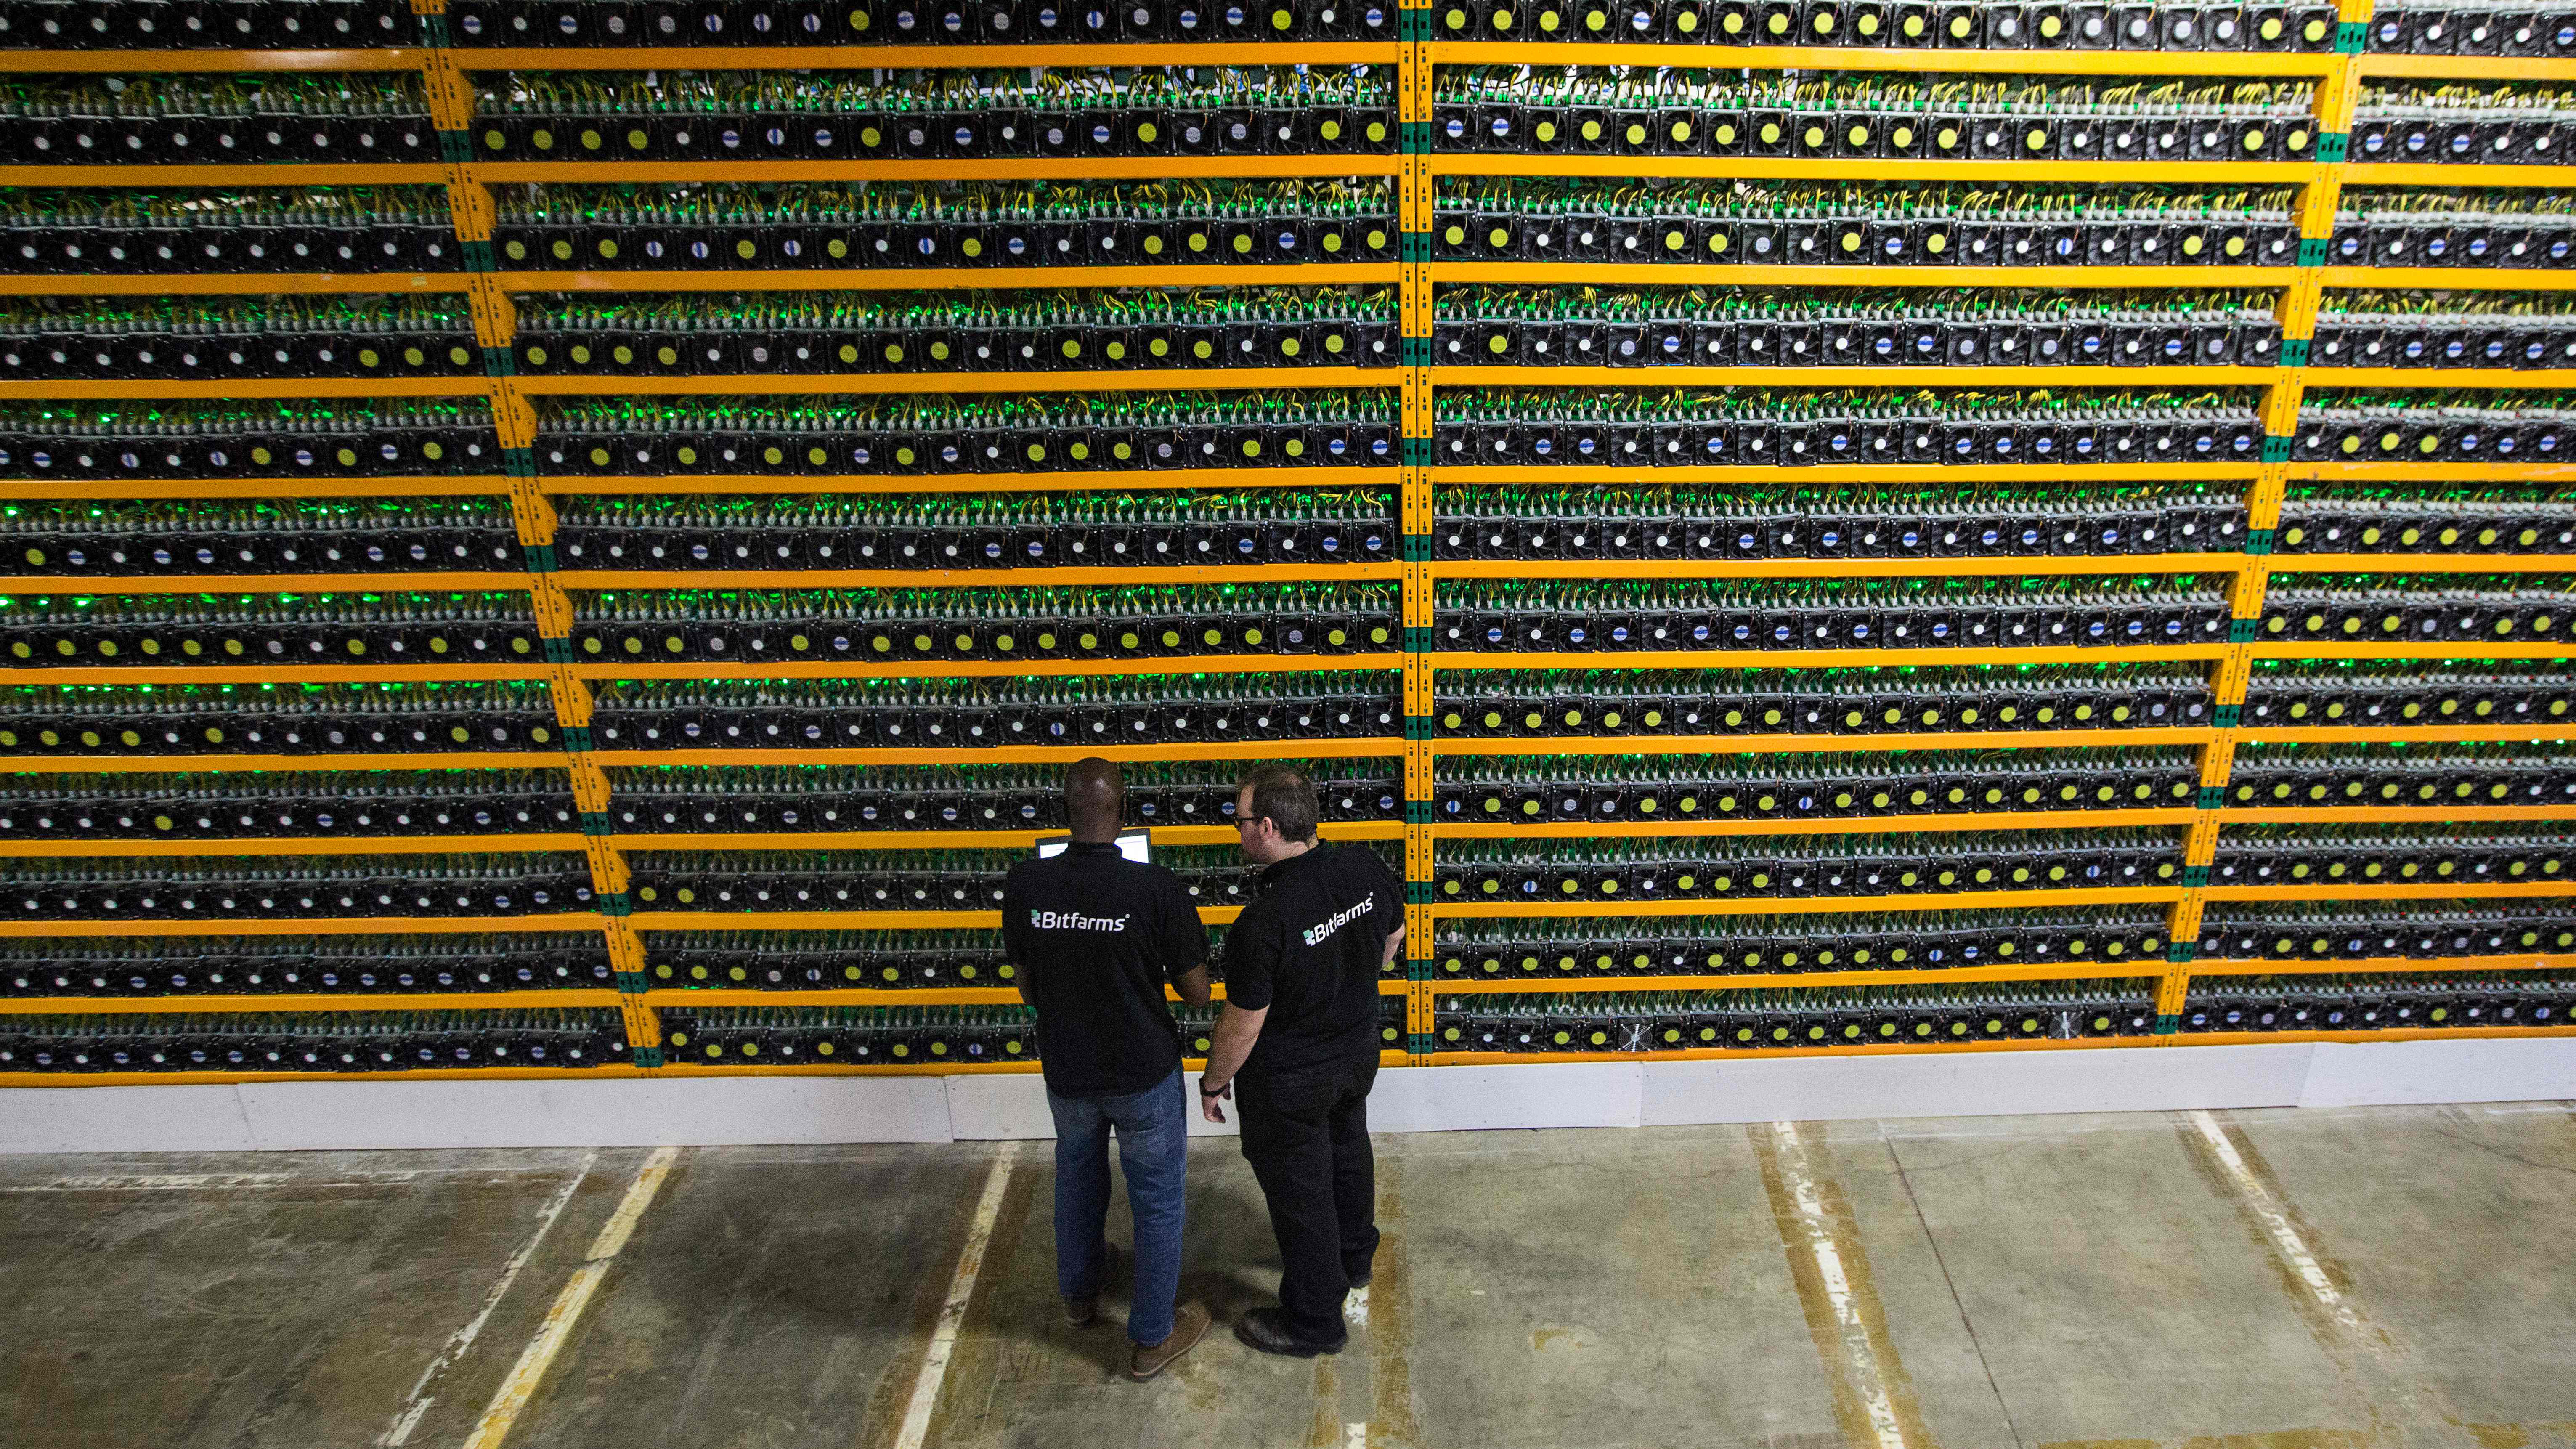 Cryptocurrency mining affects over 500 million people. And they have no  idea it is happening.